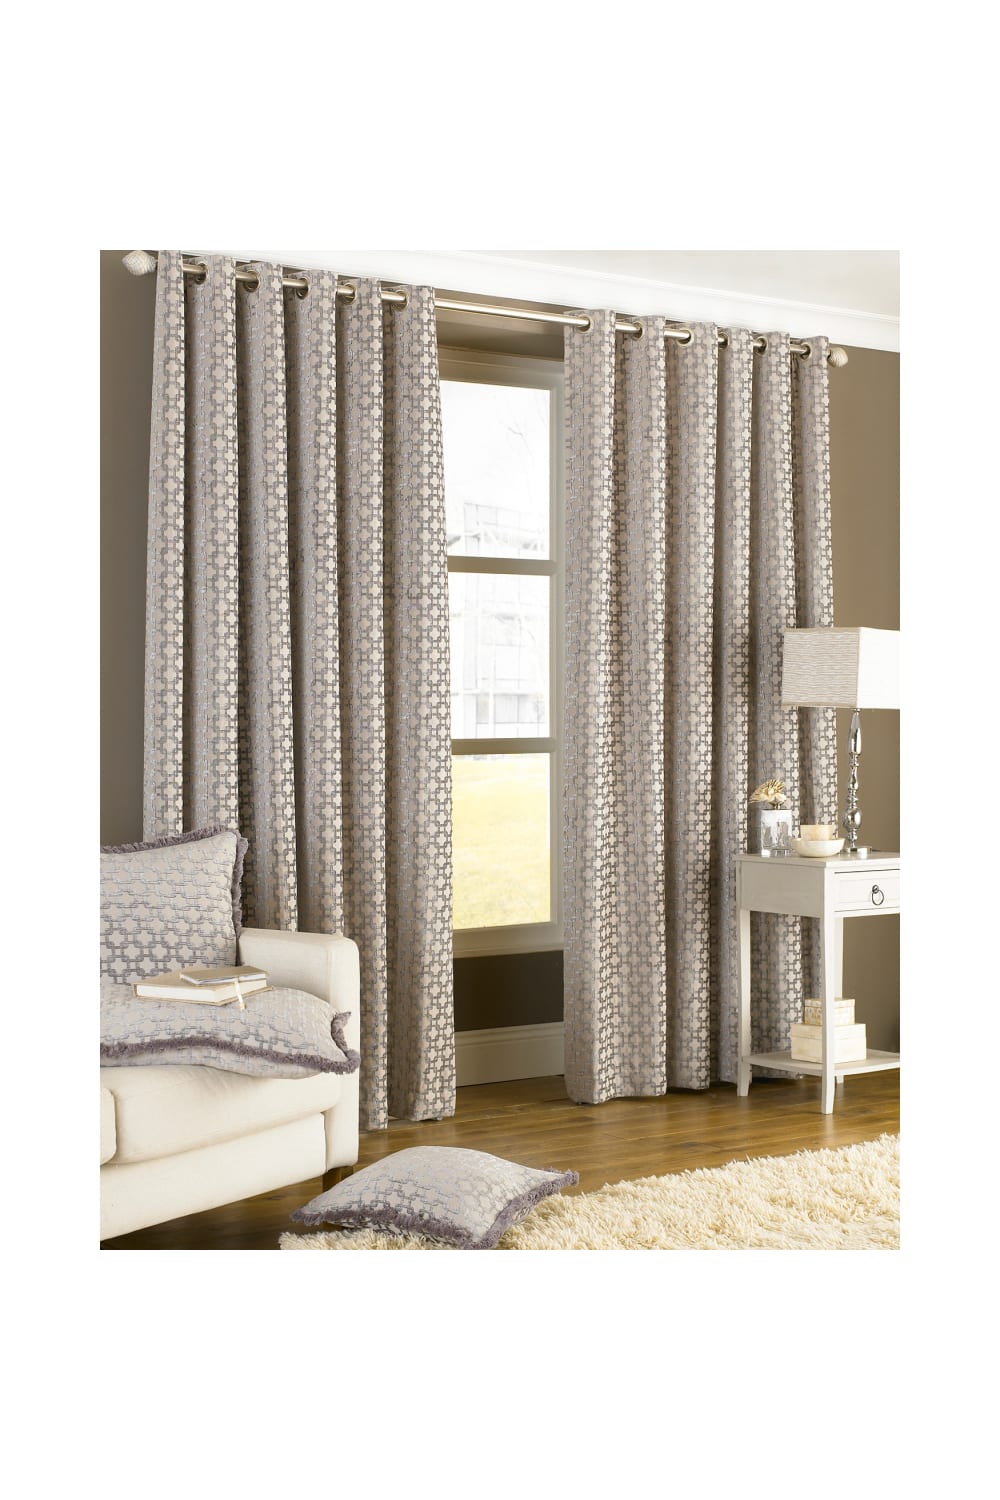 Riva Home Belmont Ringtop Curtains (Silver) (66 x 72 inch)